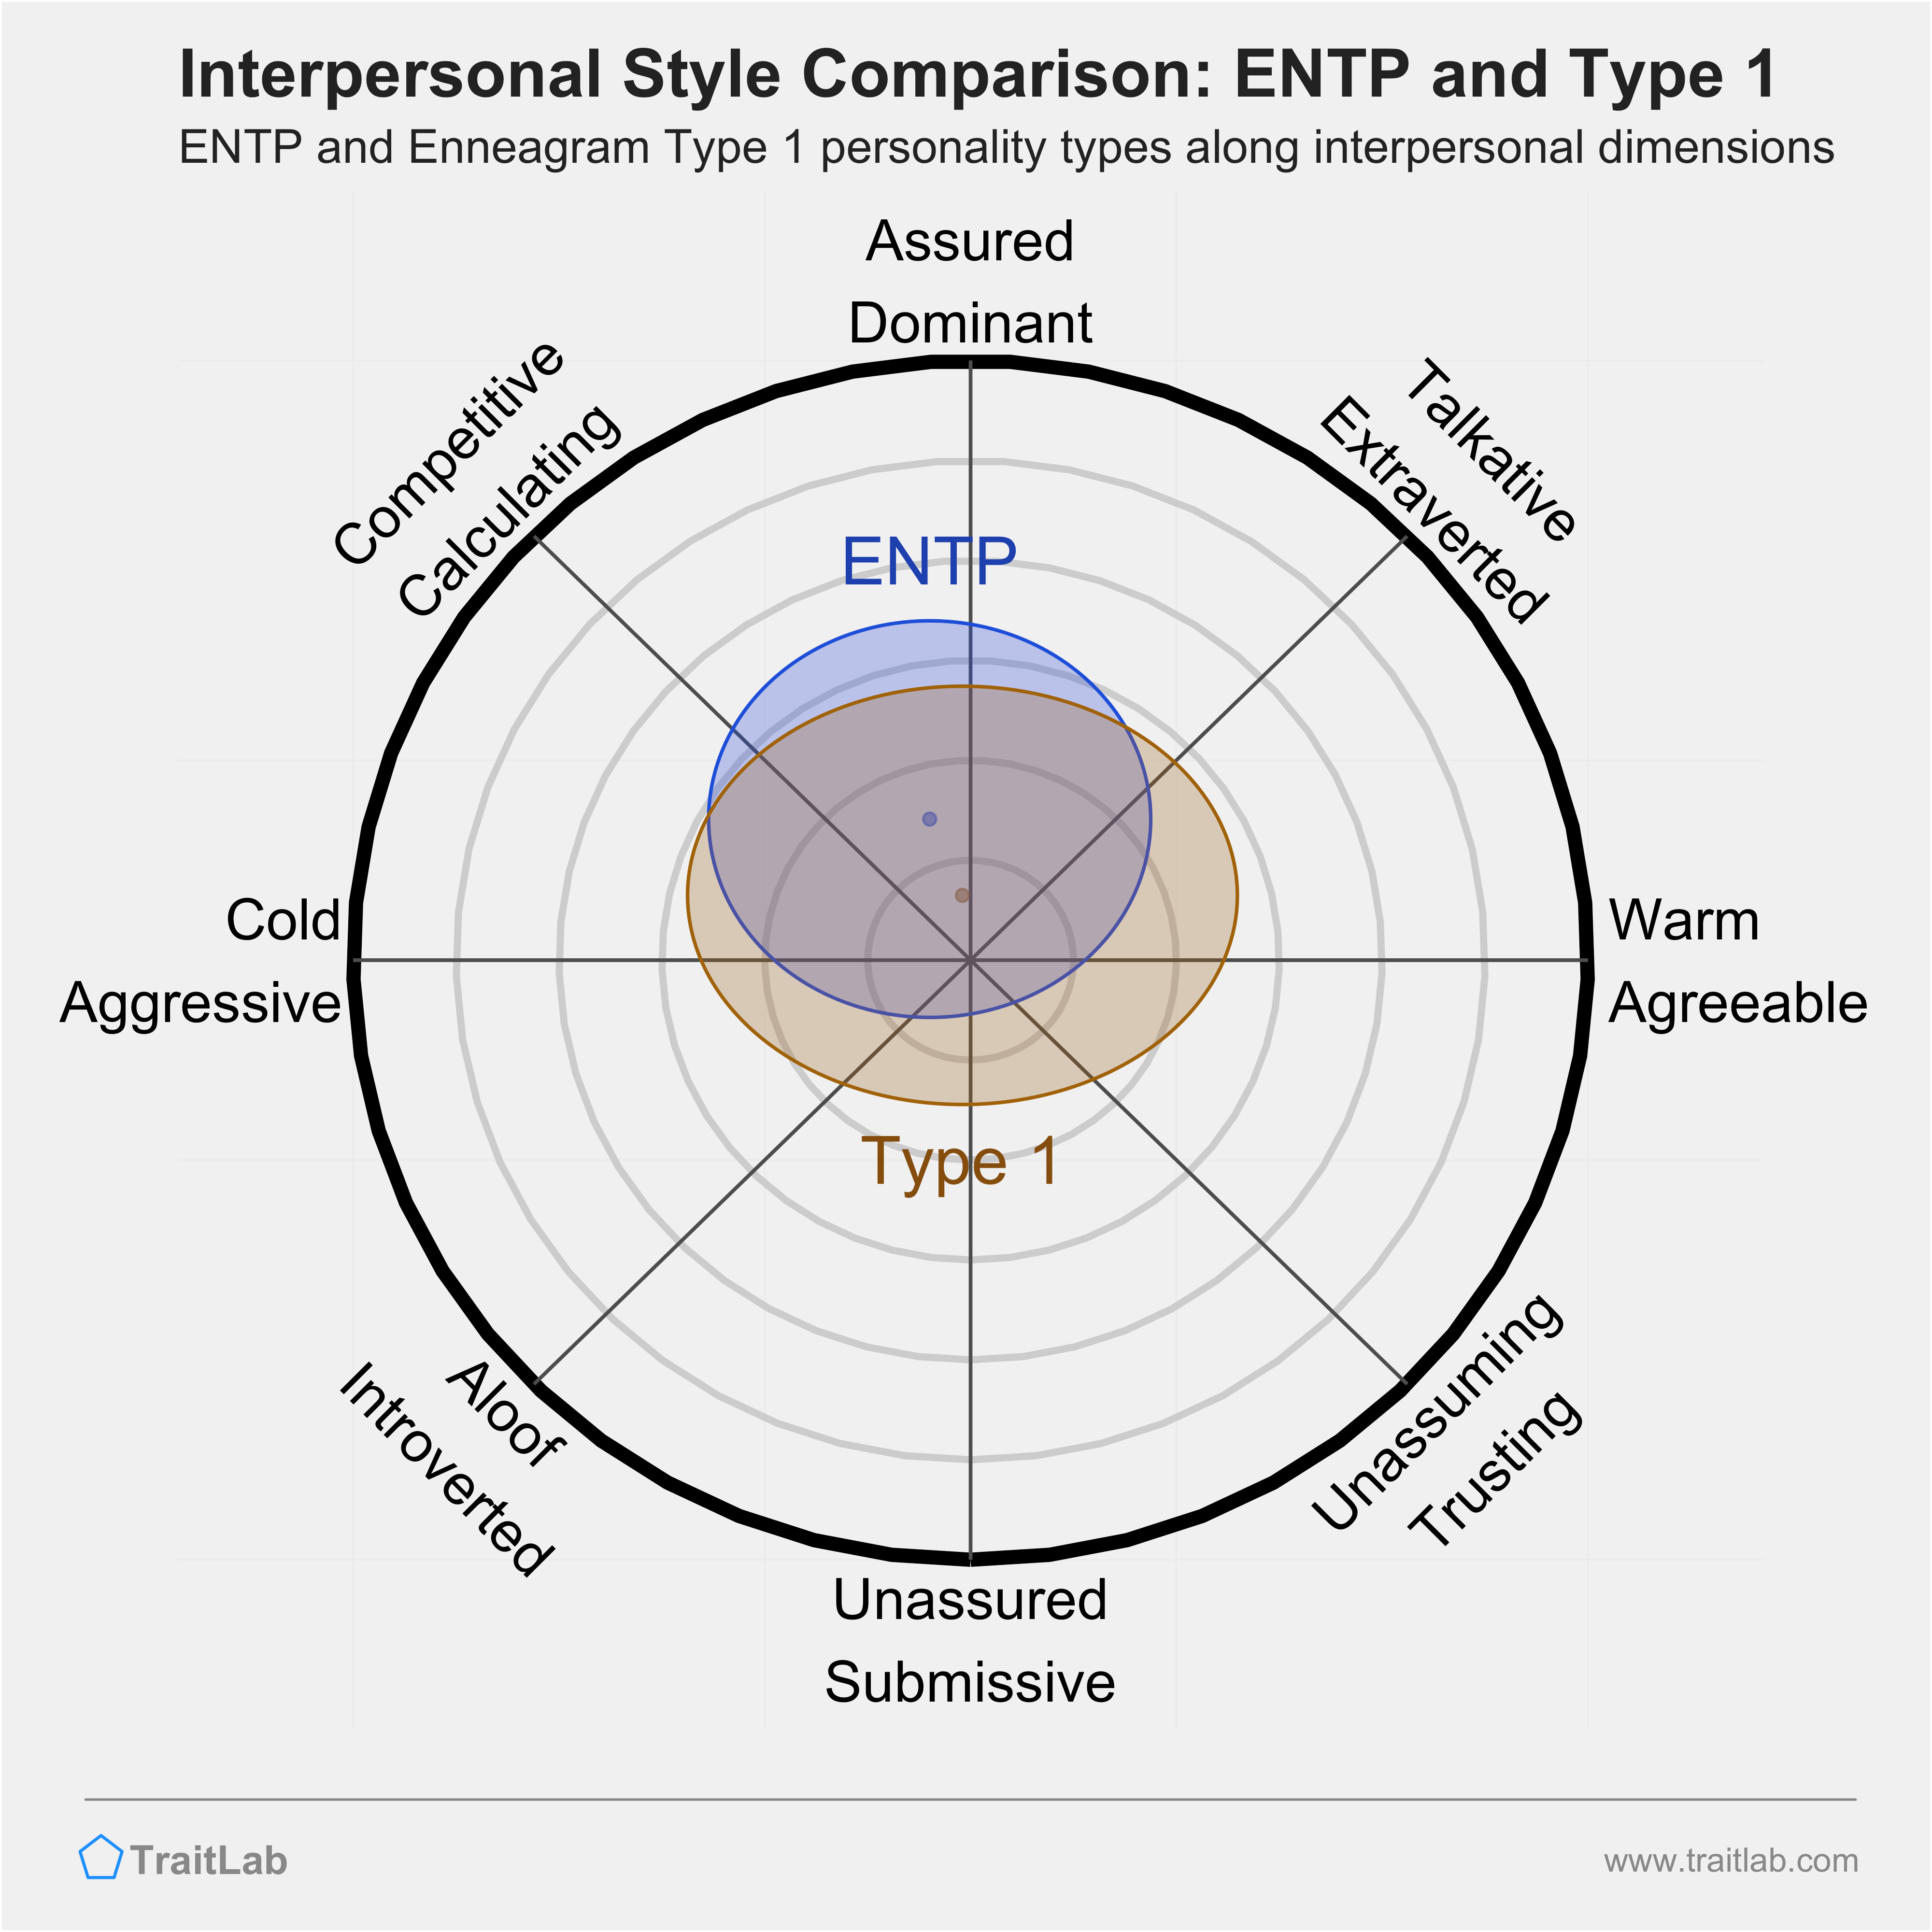 Enneagram ENTP and Type 1 comparison across interpersonal dimensions